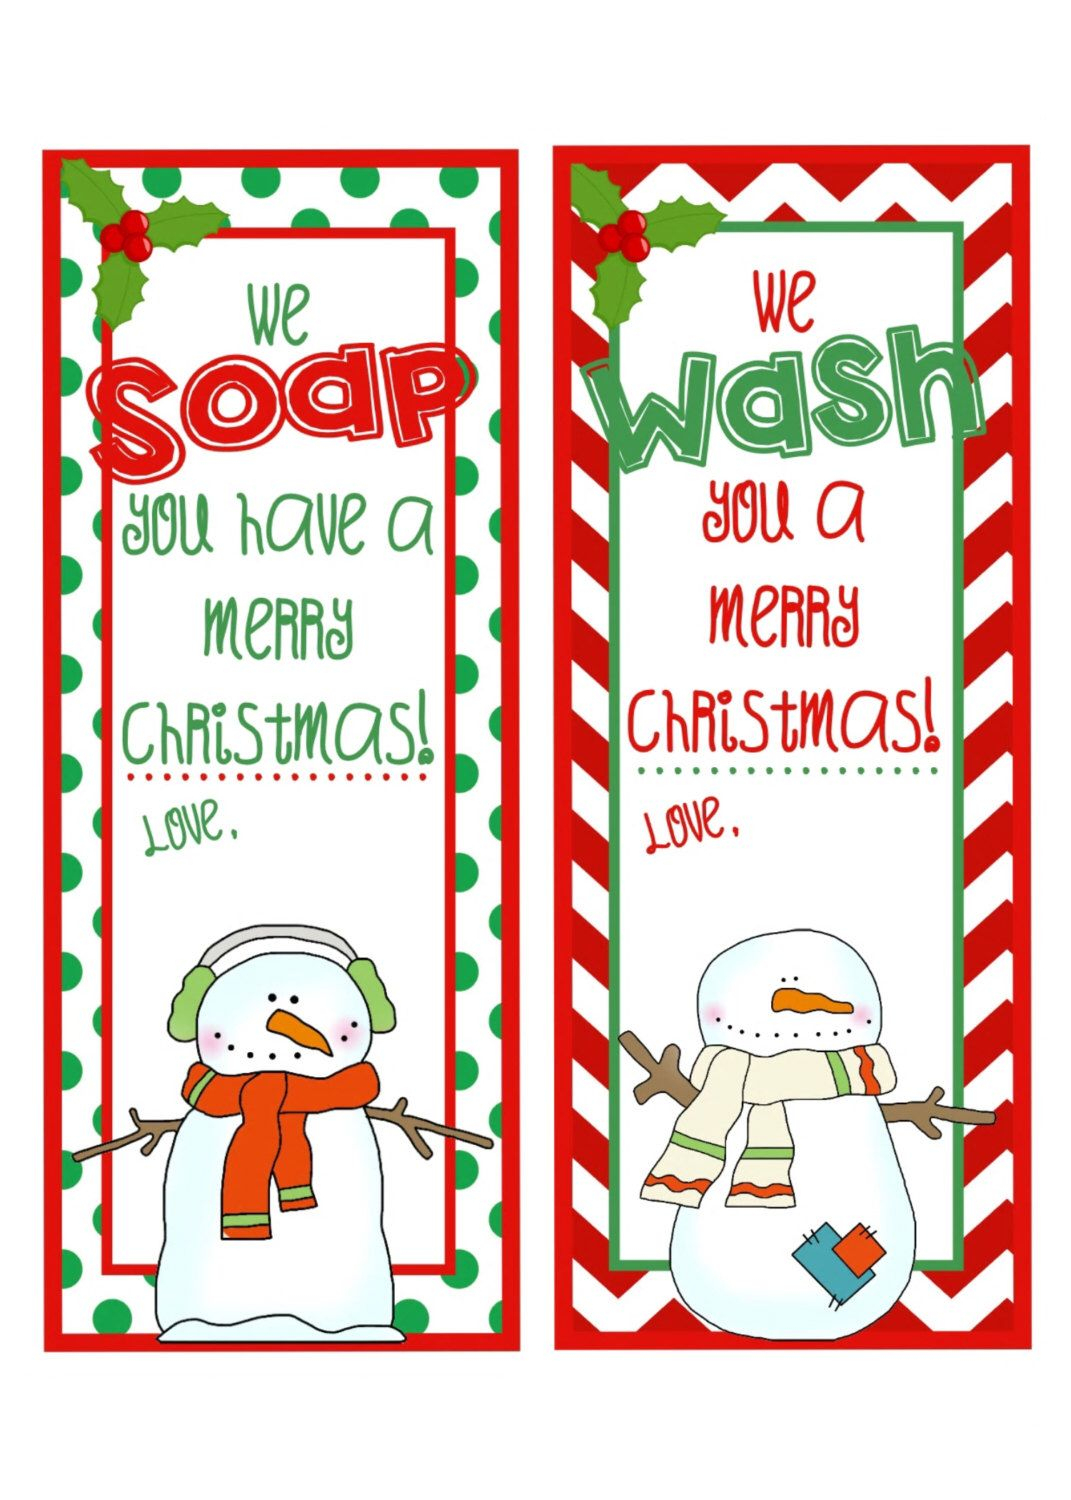 Pinkatie Gorman On Gifts And Decorations | Pinterest | Gifts - We Wash You A Merry Christmas Free Printable